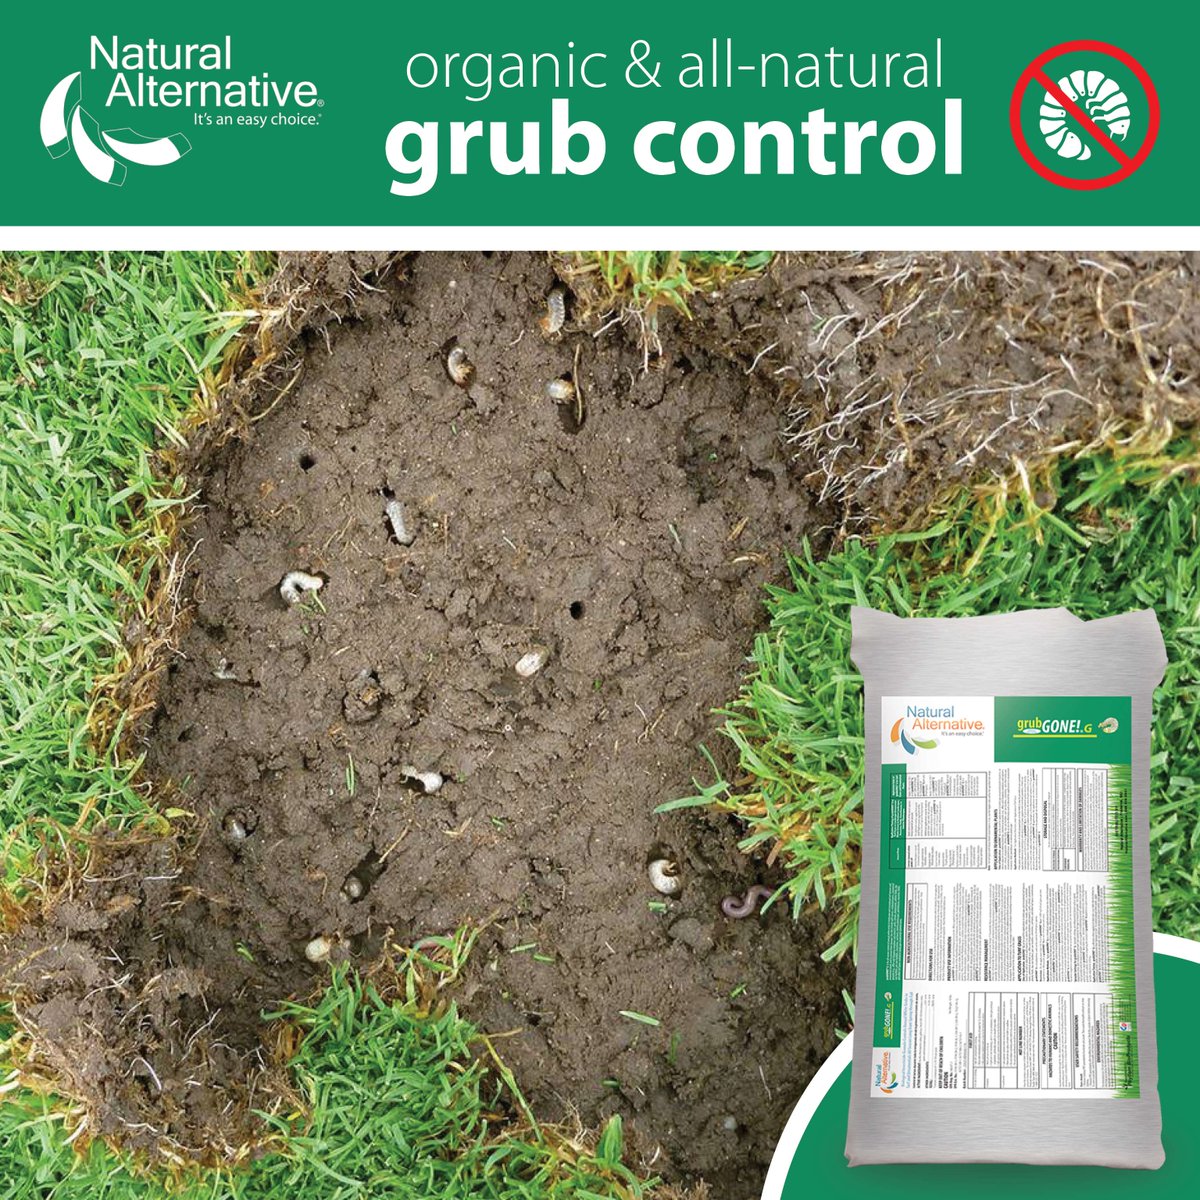 Control grubs organically with our all-natural grub control formula. grubGONE!® works without side effects and without damage to beneficial insects and pollinators.

ORDER NOW: ow.ly/CsXV50RrhR9

#NaturalAlternative #DIY #Organic #Beetles #PestControl #Grubs